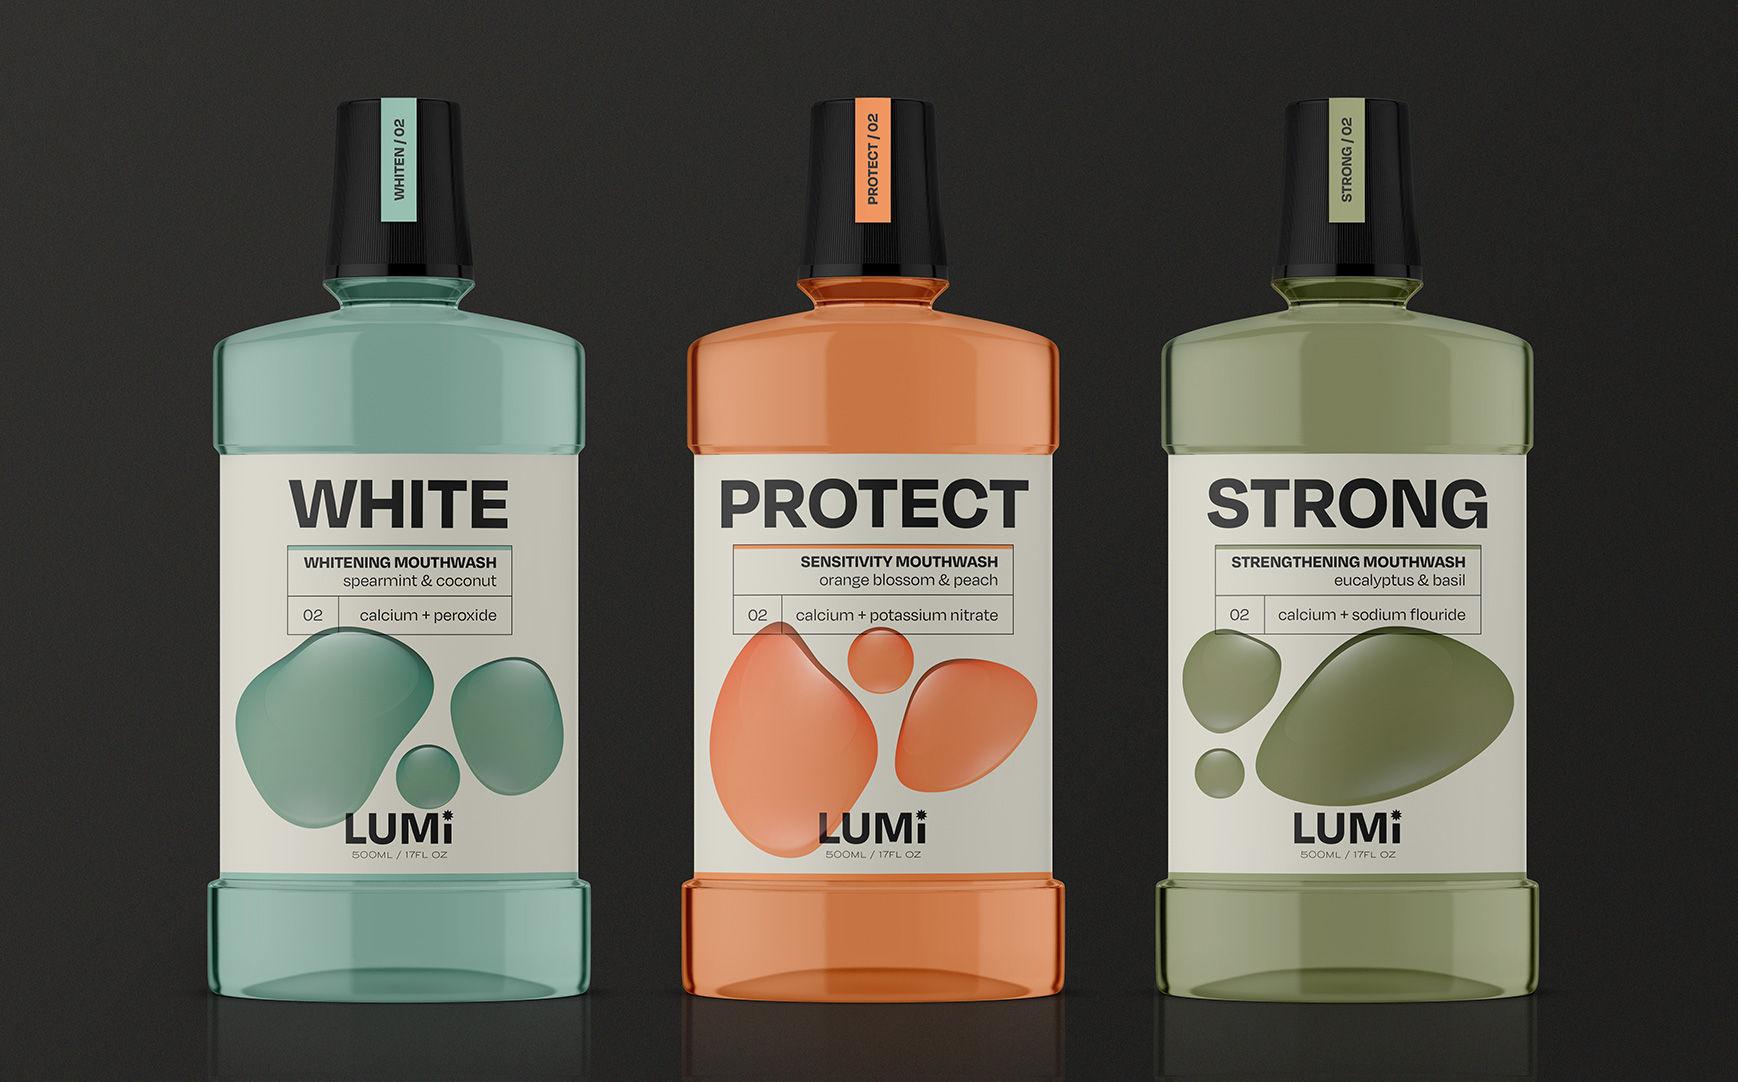 three mouthwashes in the three flavours (white, protect and strong) featuring images of coloured blobs of liquid